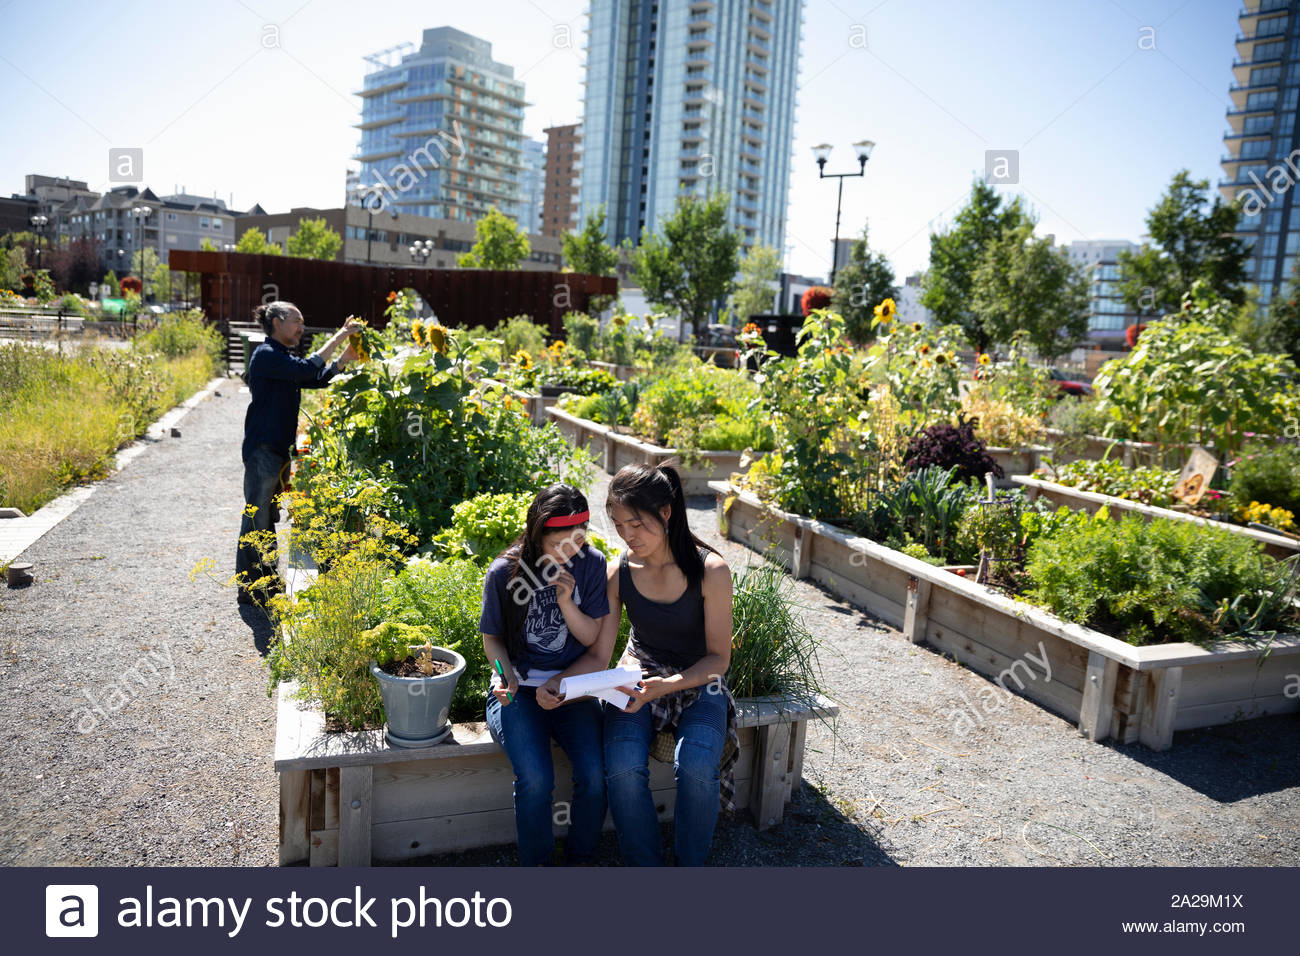 Sisters with notepad planning in sunny, urban community garden Stock Photo